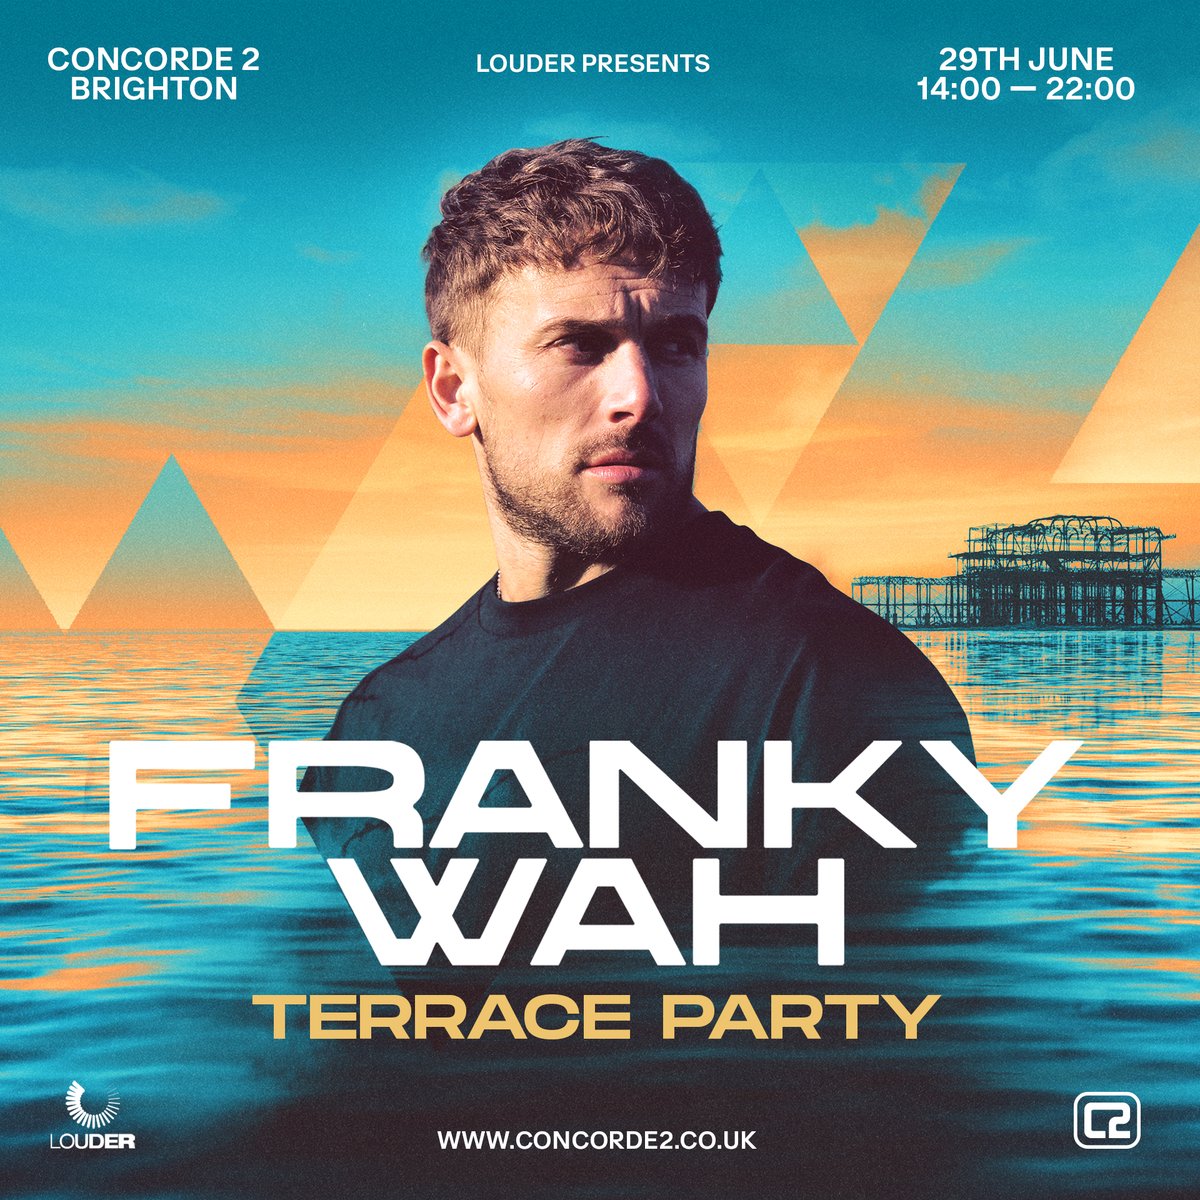 ☀☀ Now On Sale ☀☀ We are excited to announce that @frankywahmusic will be playing our summer terrace series! This will sell quickly, so grab your ticket and join us out in the sun! Tickets available from concorde2.co.uk